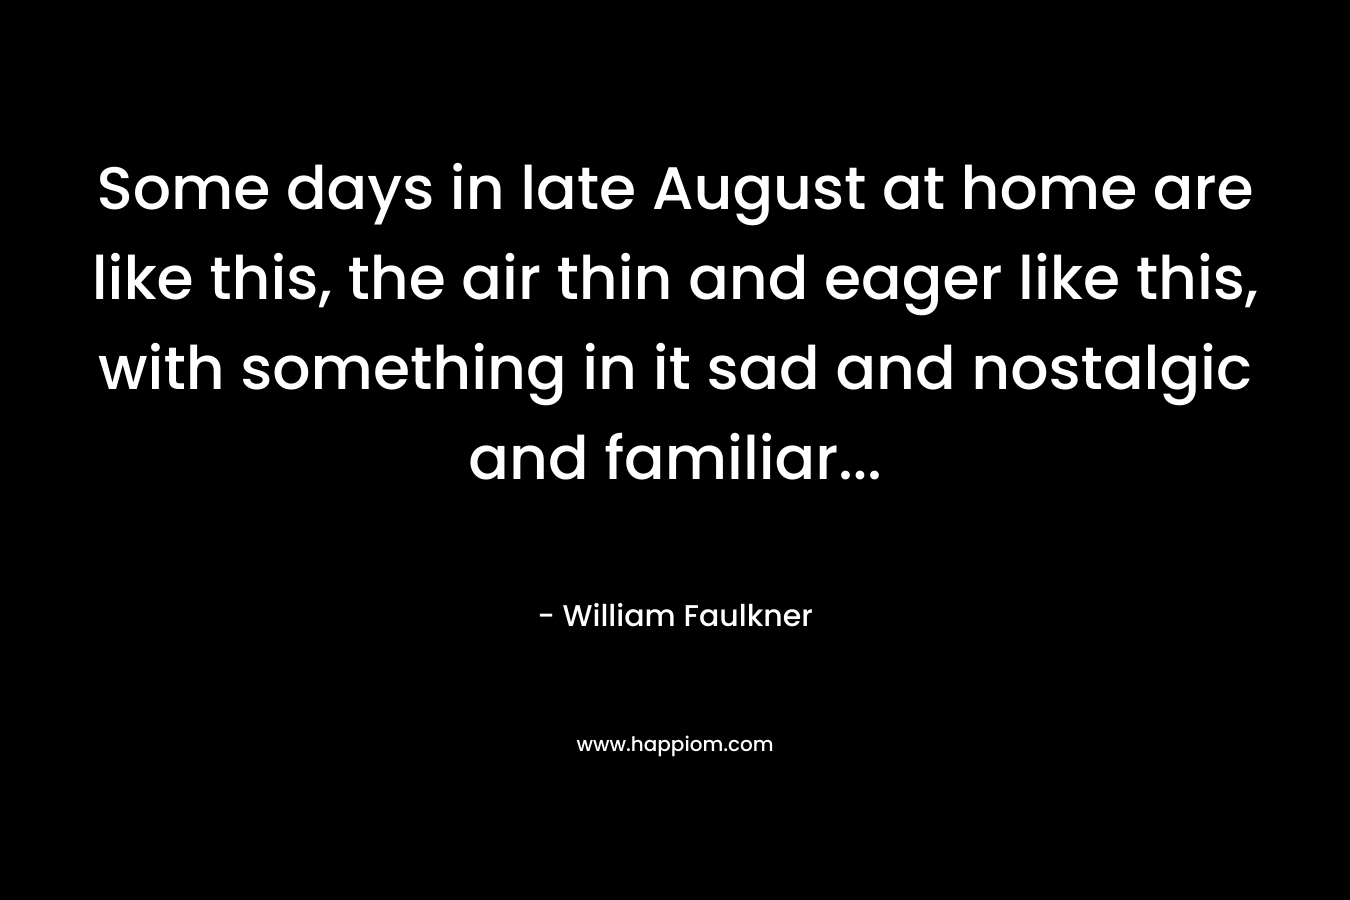 Some days in late August at home are like this, the air thin and eager like this, with something in it sad and nostalgic and familiar… – William Faulkner